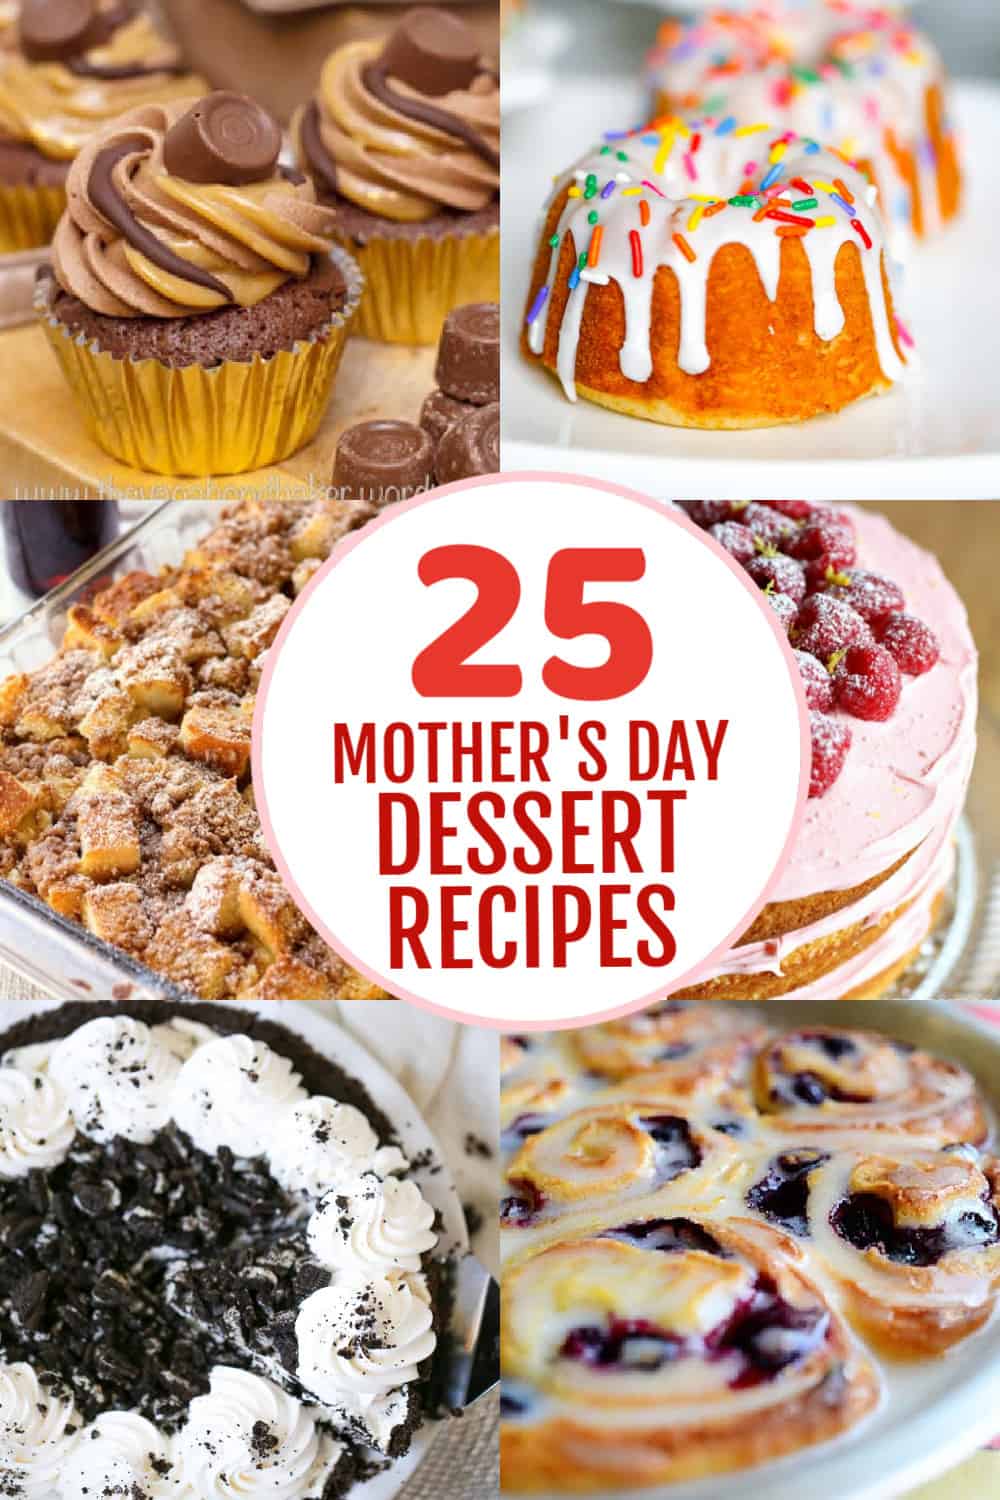 25 Mother’s Day Dessert Recipes